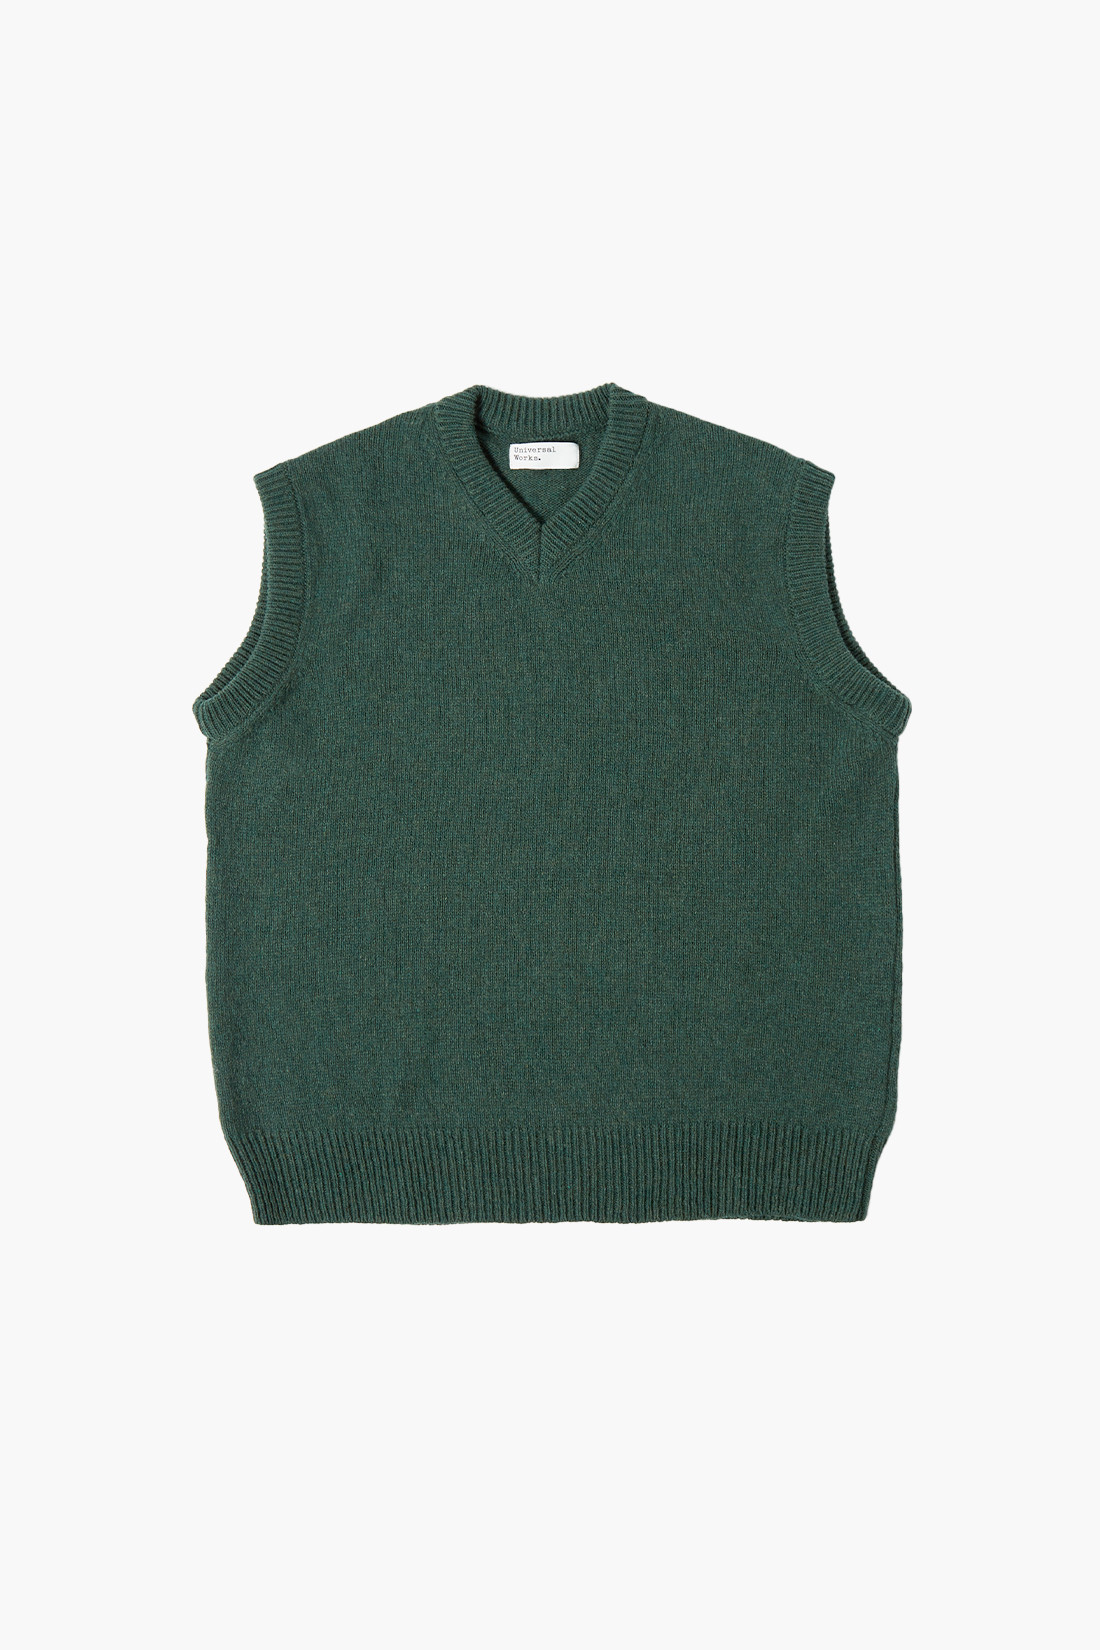 Universal works Sweater vest eco wool Olive - GRADUATE STORE | FR